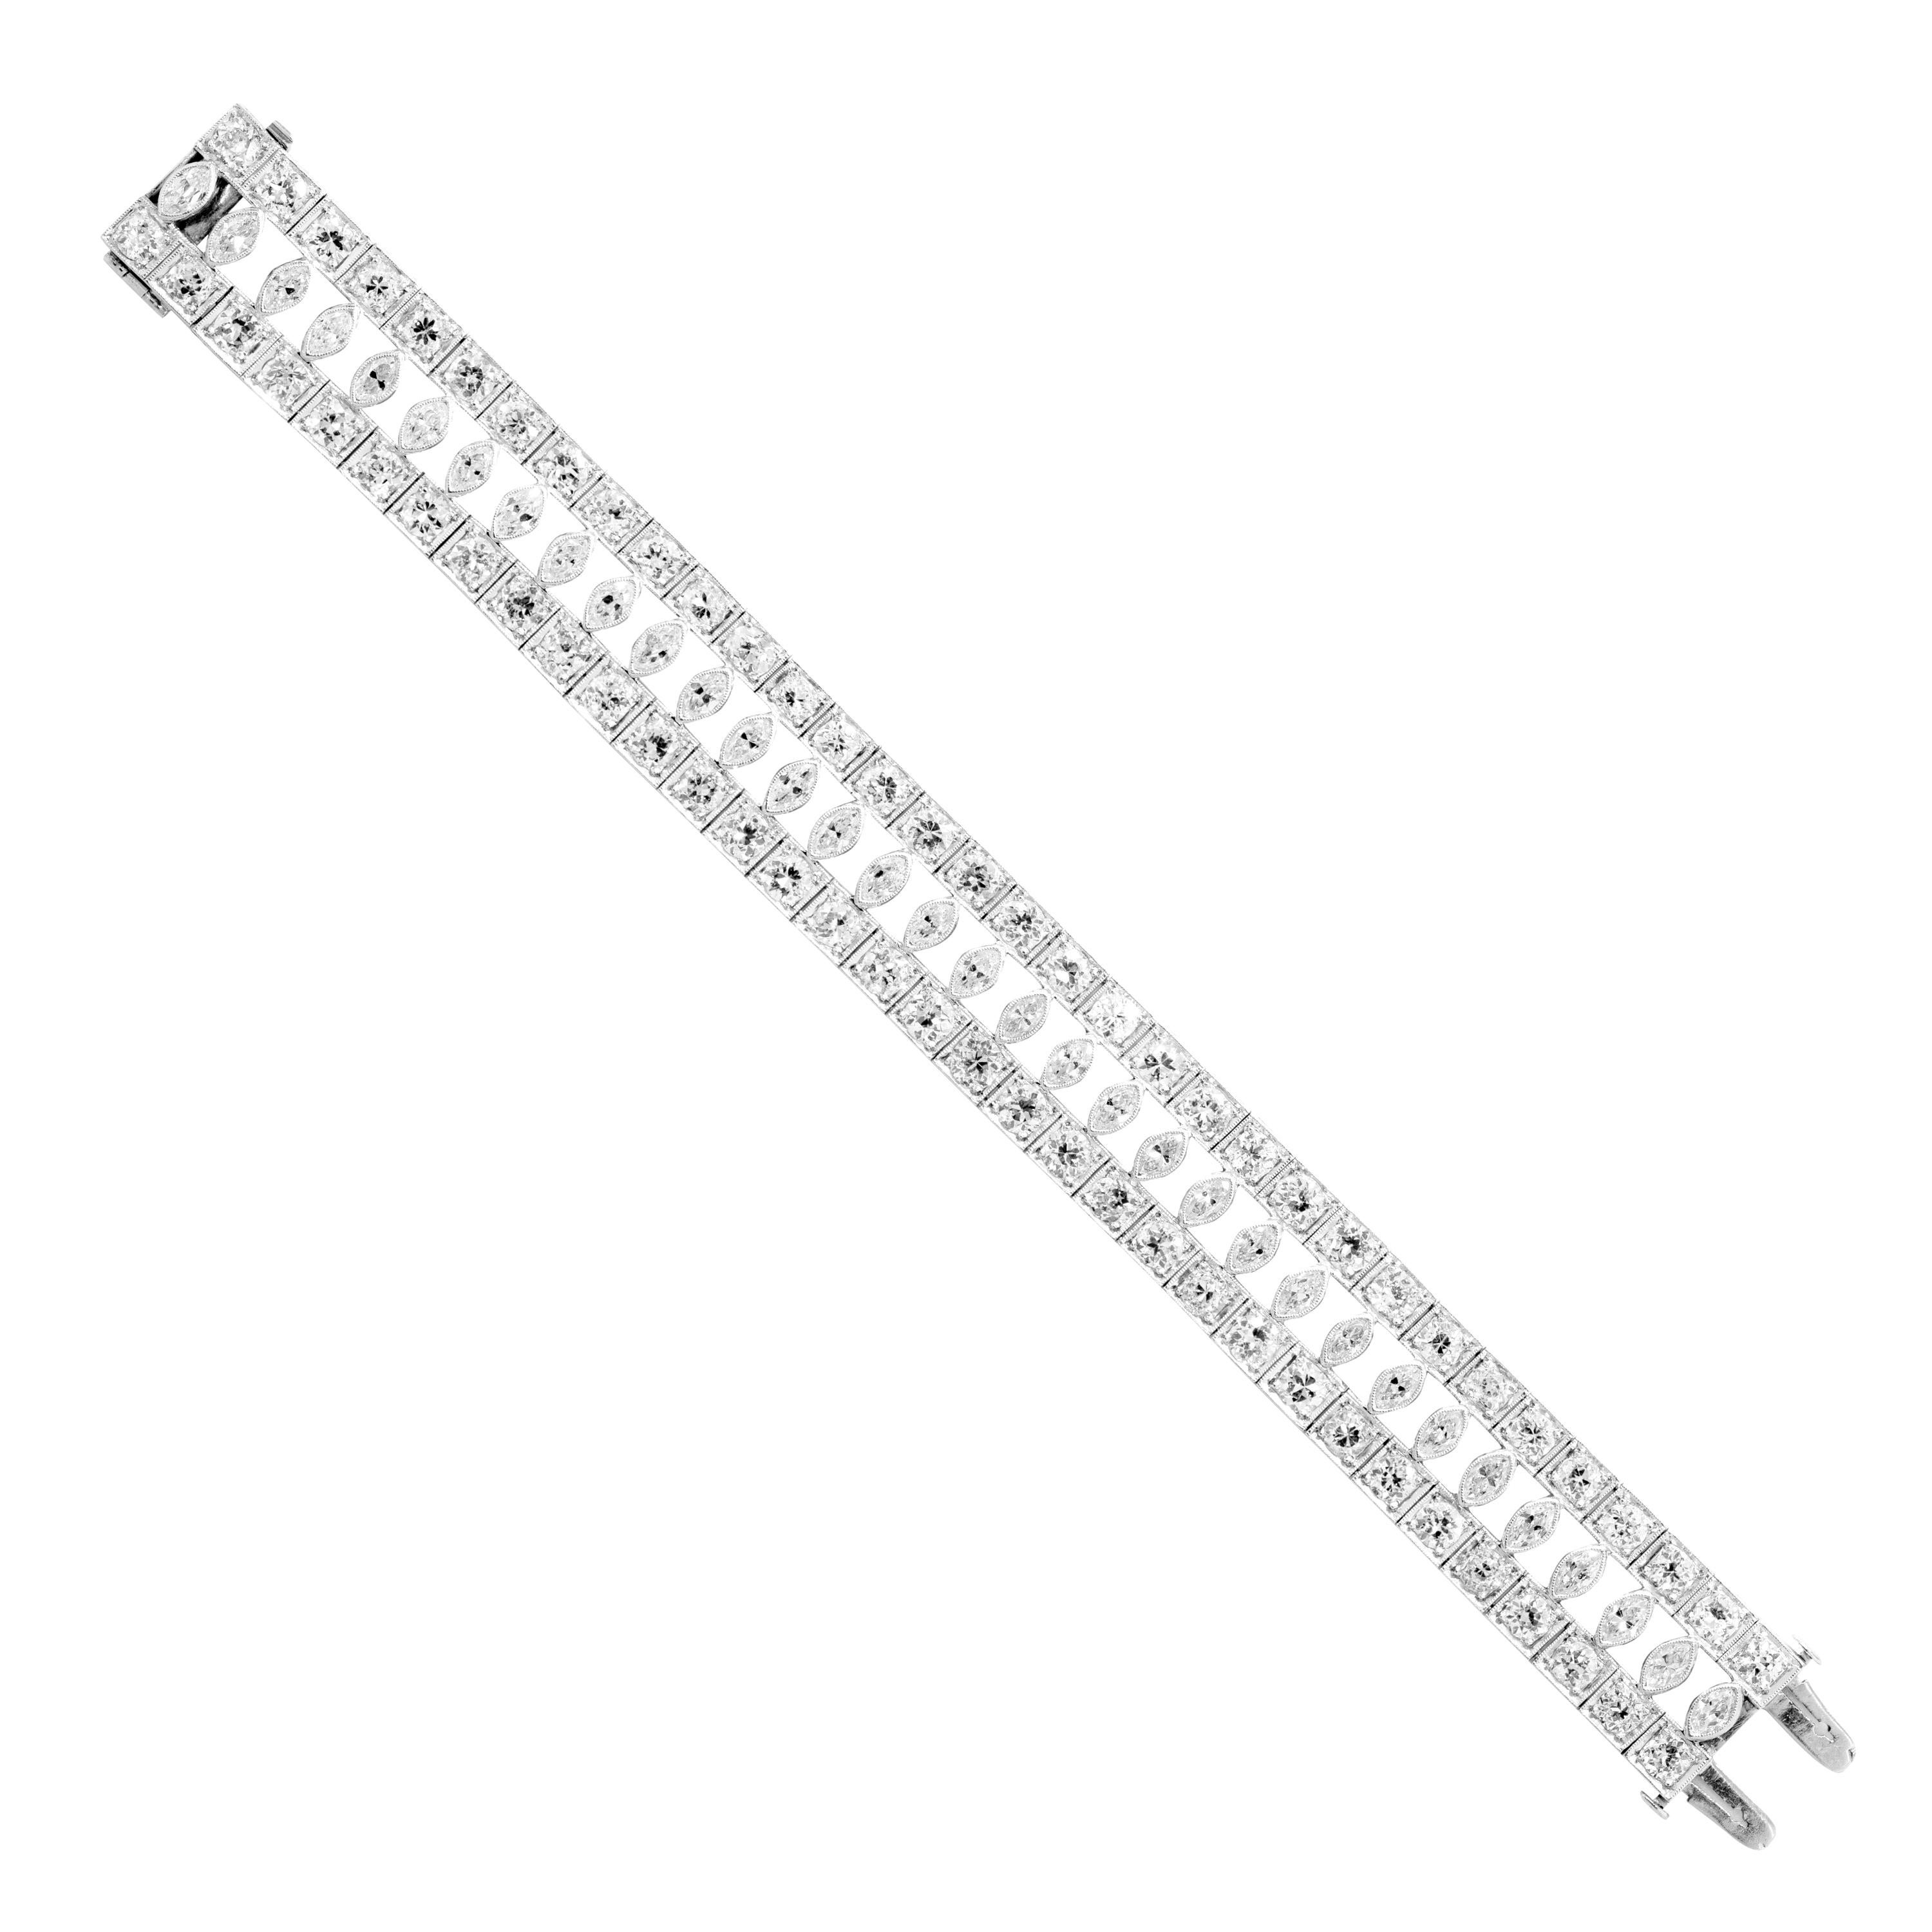 Stunning hand made art deco bracelet with two rows of box set old cut diamonds and rub over marquise diamonds in between. The approximate total diamond weight is 21.50 carats with thirty four marquise diamonds and sixty eight round old cut diamonds.